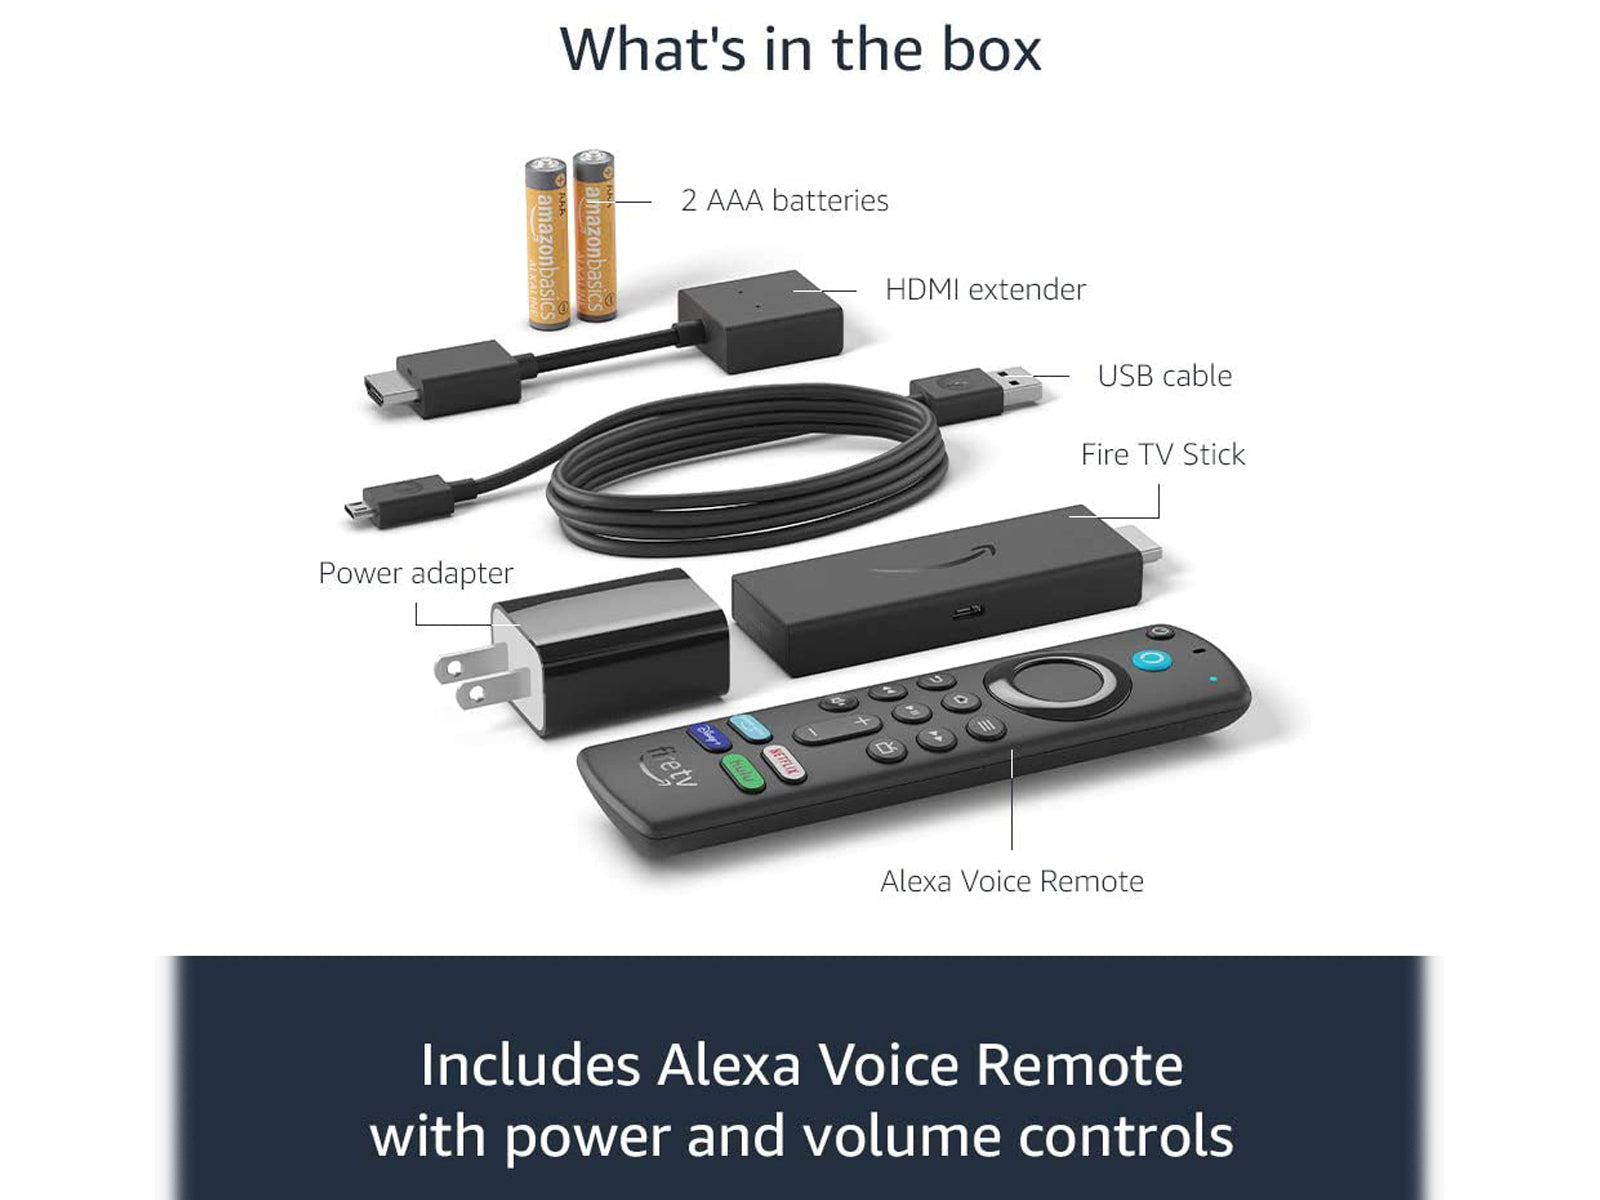 Image shows all the items included with the Amazon Fire TV Stick HD 2020